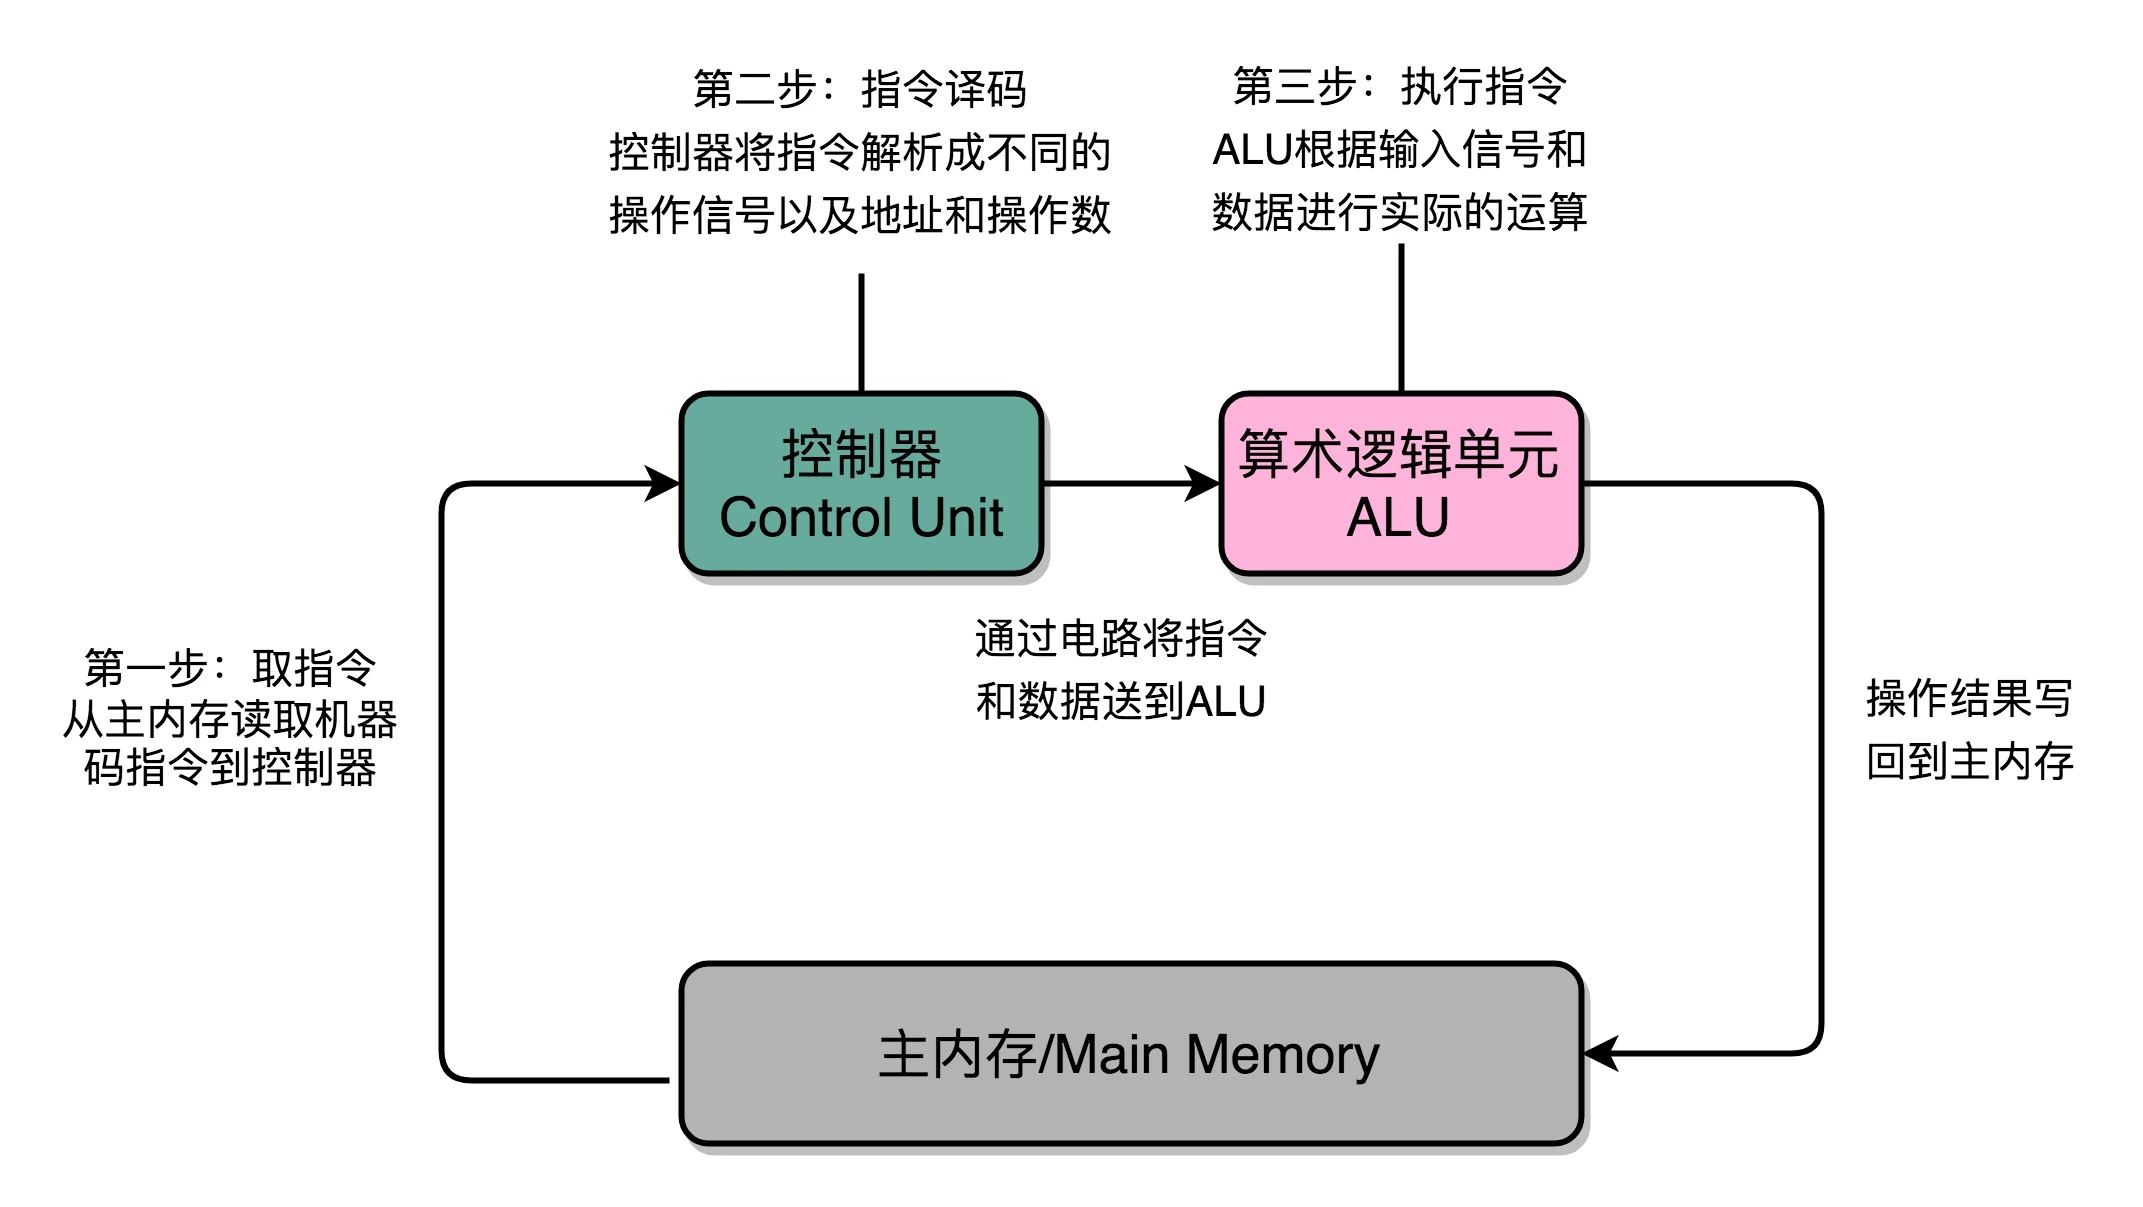 https://img.zhaoweiguo.com/knowledge/images/cores/composition-principles/data-path2.jpg